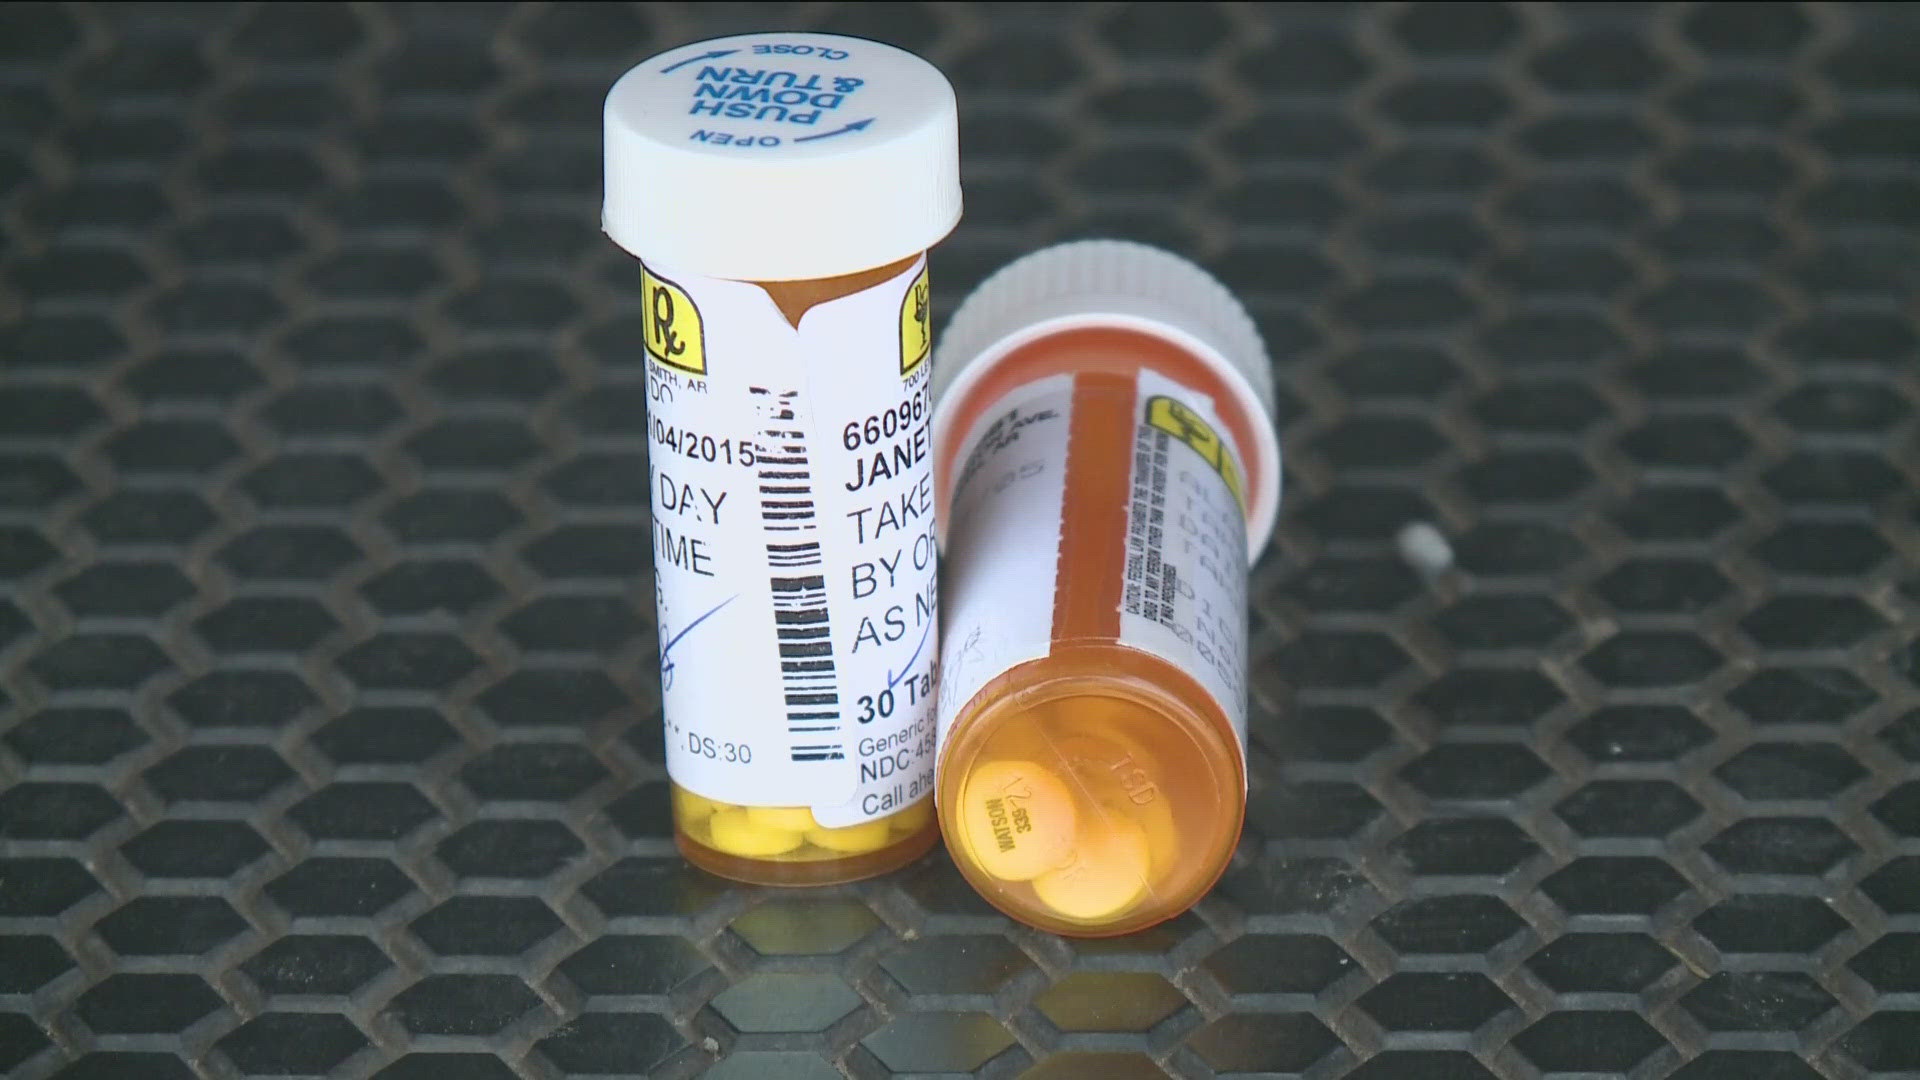 LAW ENFORCEMENT AGENCIES ACROSS THE COUNTRY ARE HOSTING DRUG TAKE BACK DAY EVENTS THIS WEEKEND...